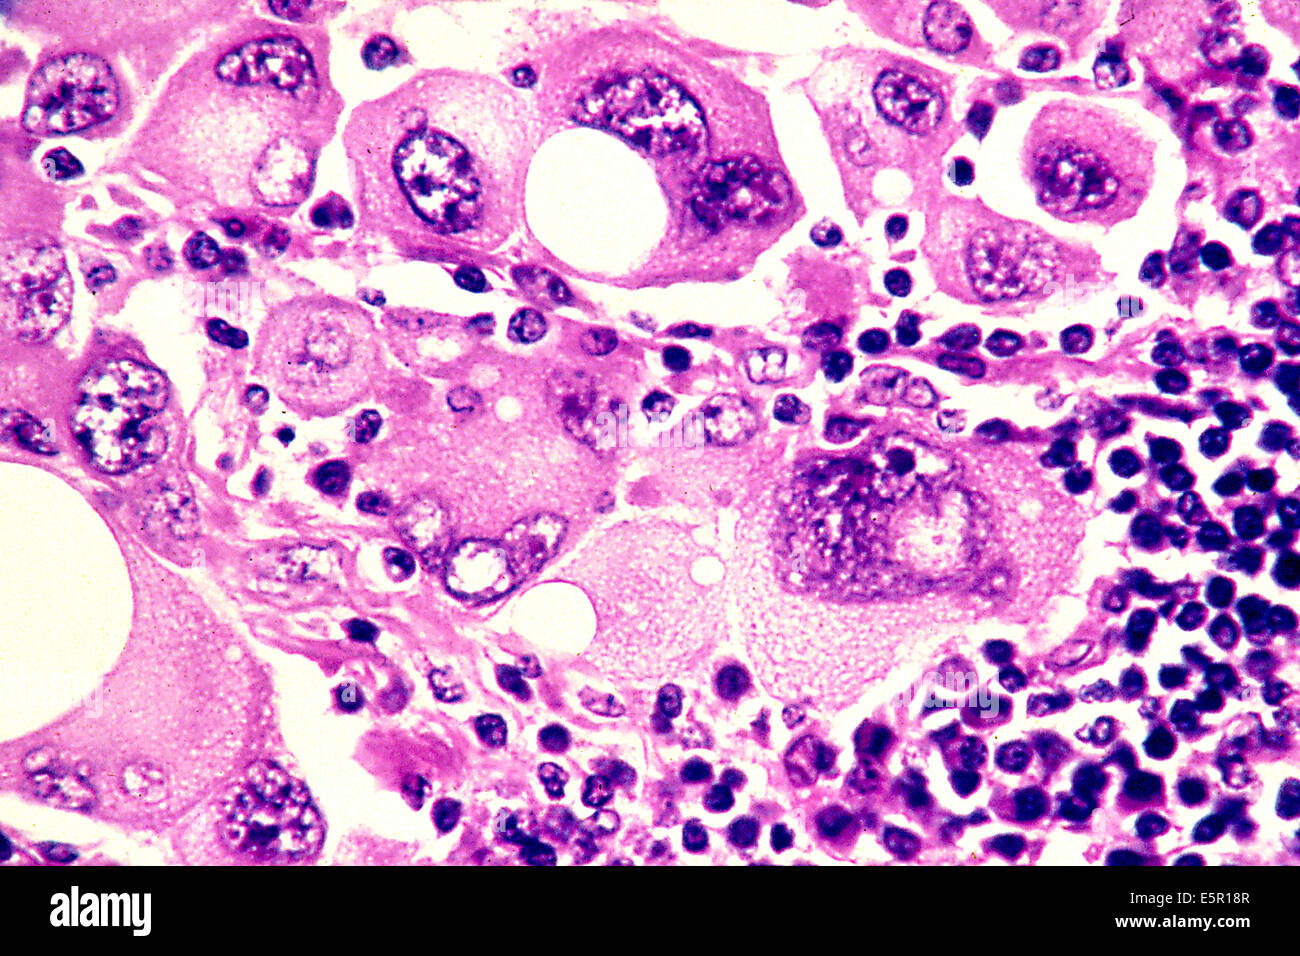 Photomicrograph Of Human Metastatic Melanoma Cells Magnified To 320x